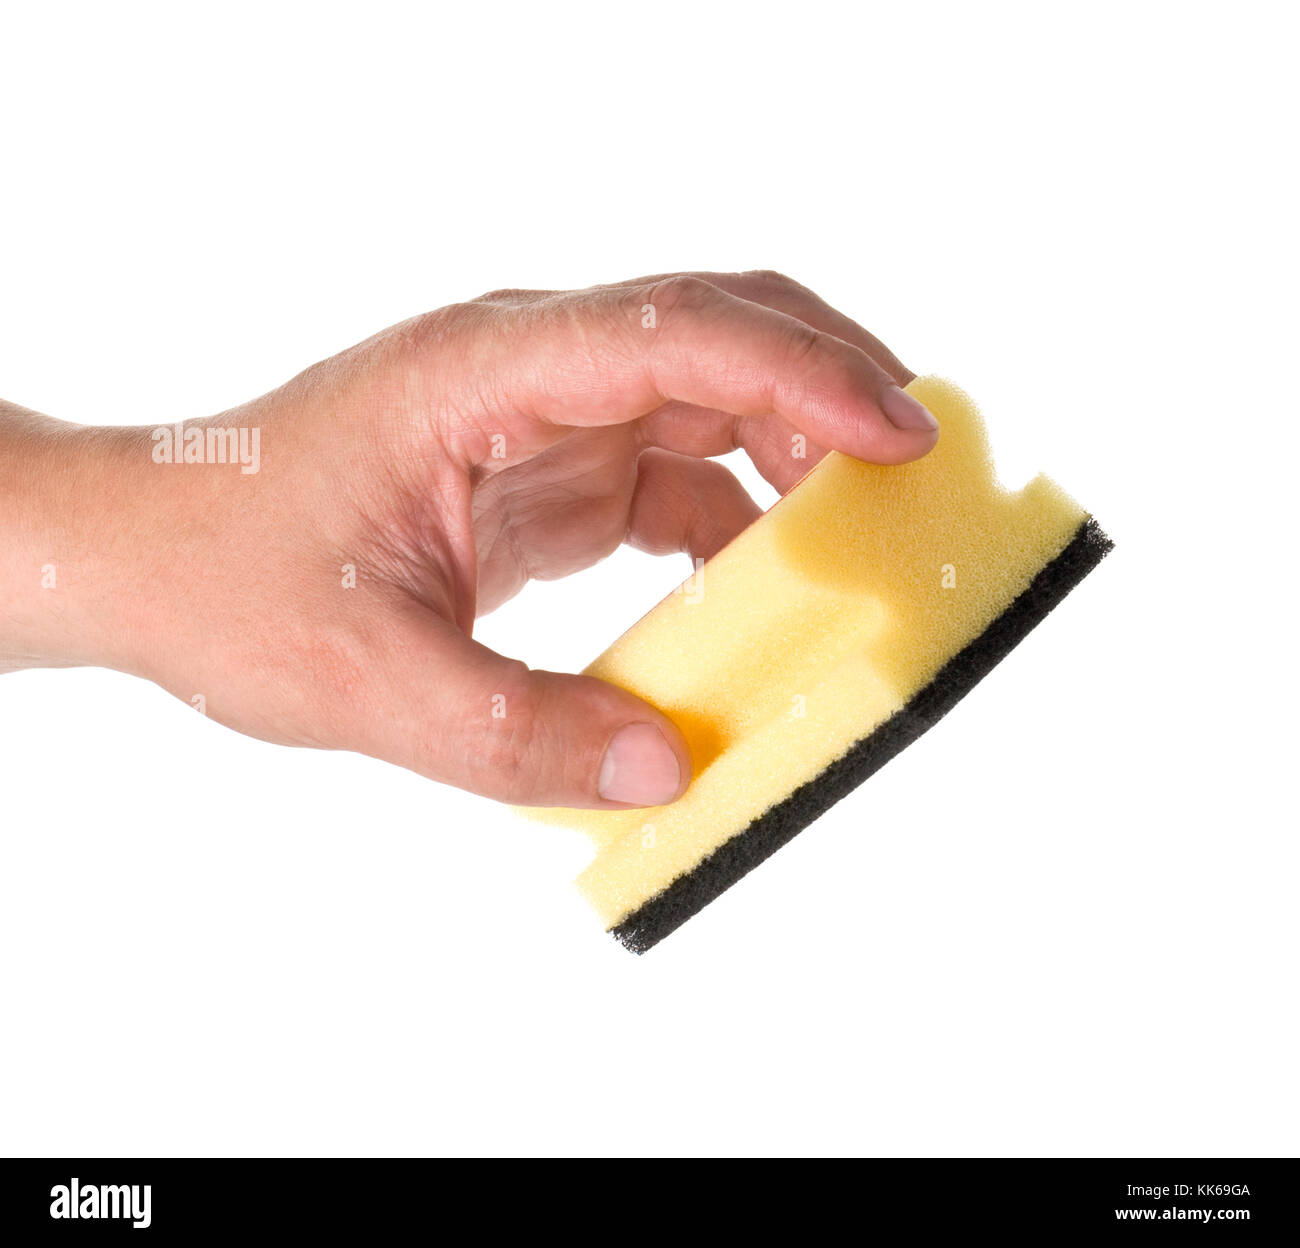 Household sponge in a hand on a white background Stock Photo